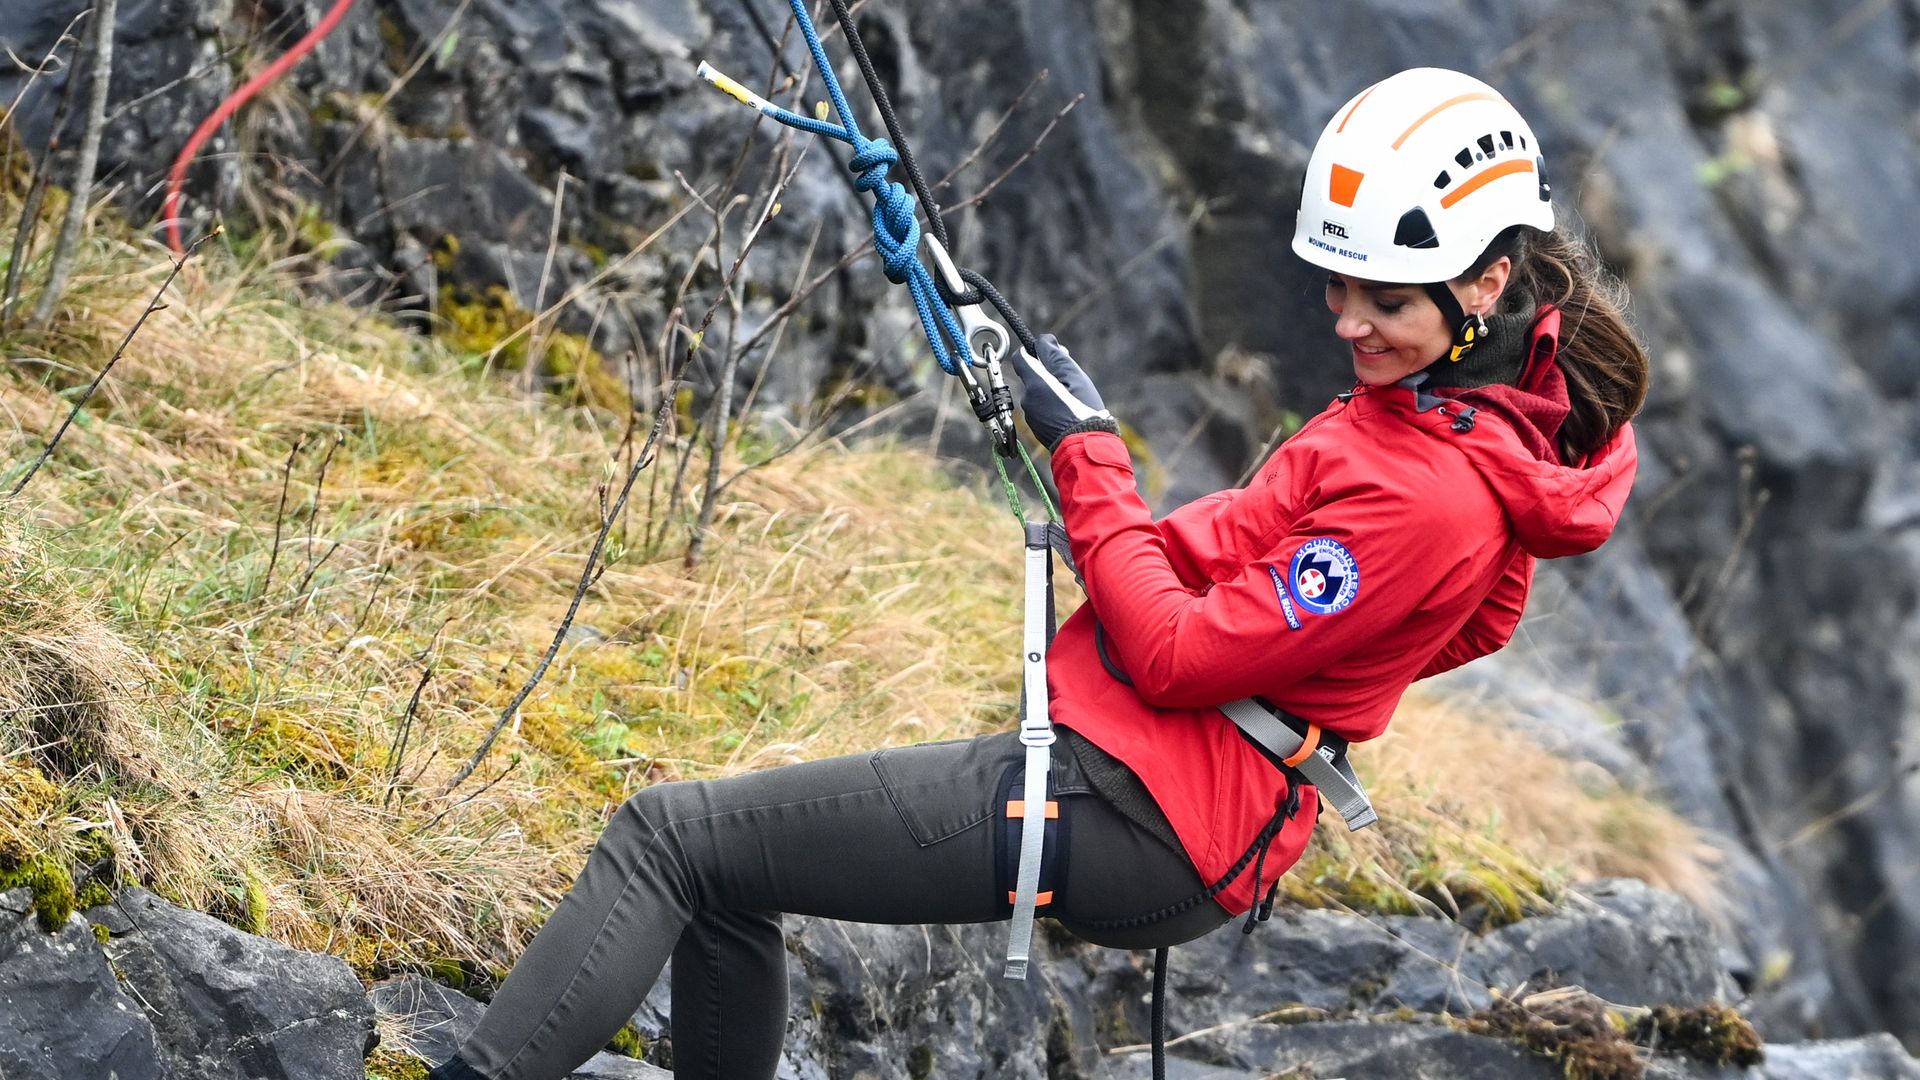 The Princess of Wales abseiling in Wales